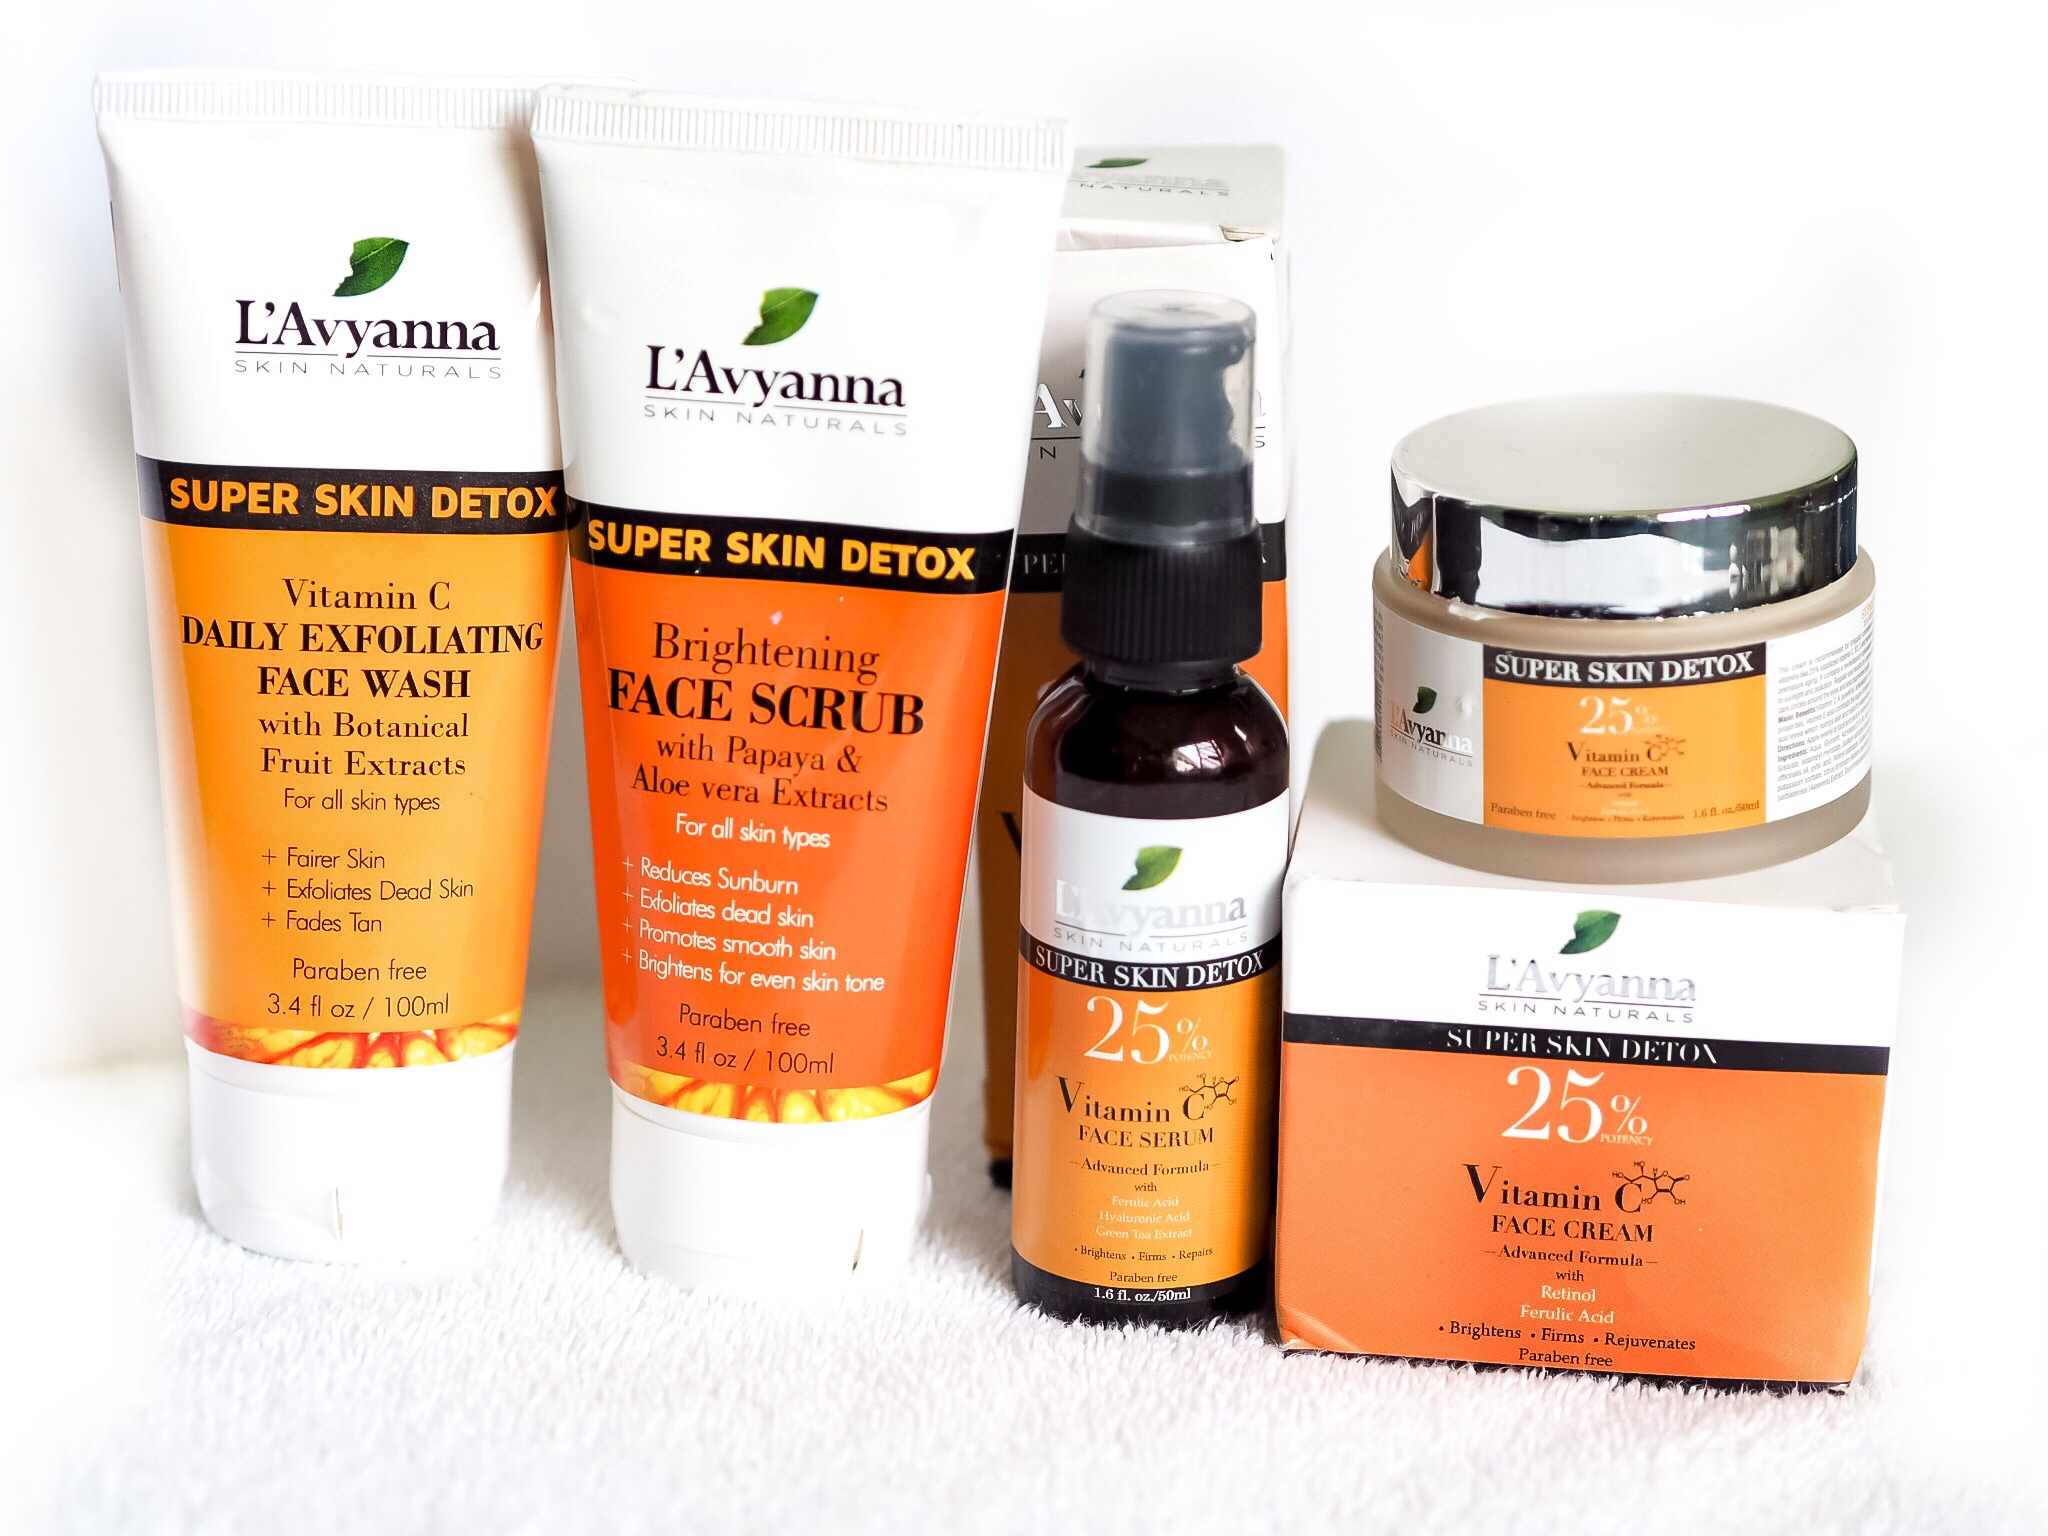 Lavyanna Skincare Products - facial products review